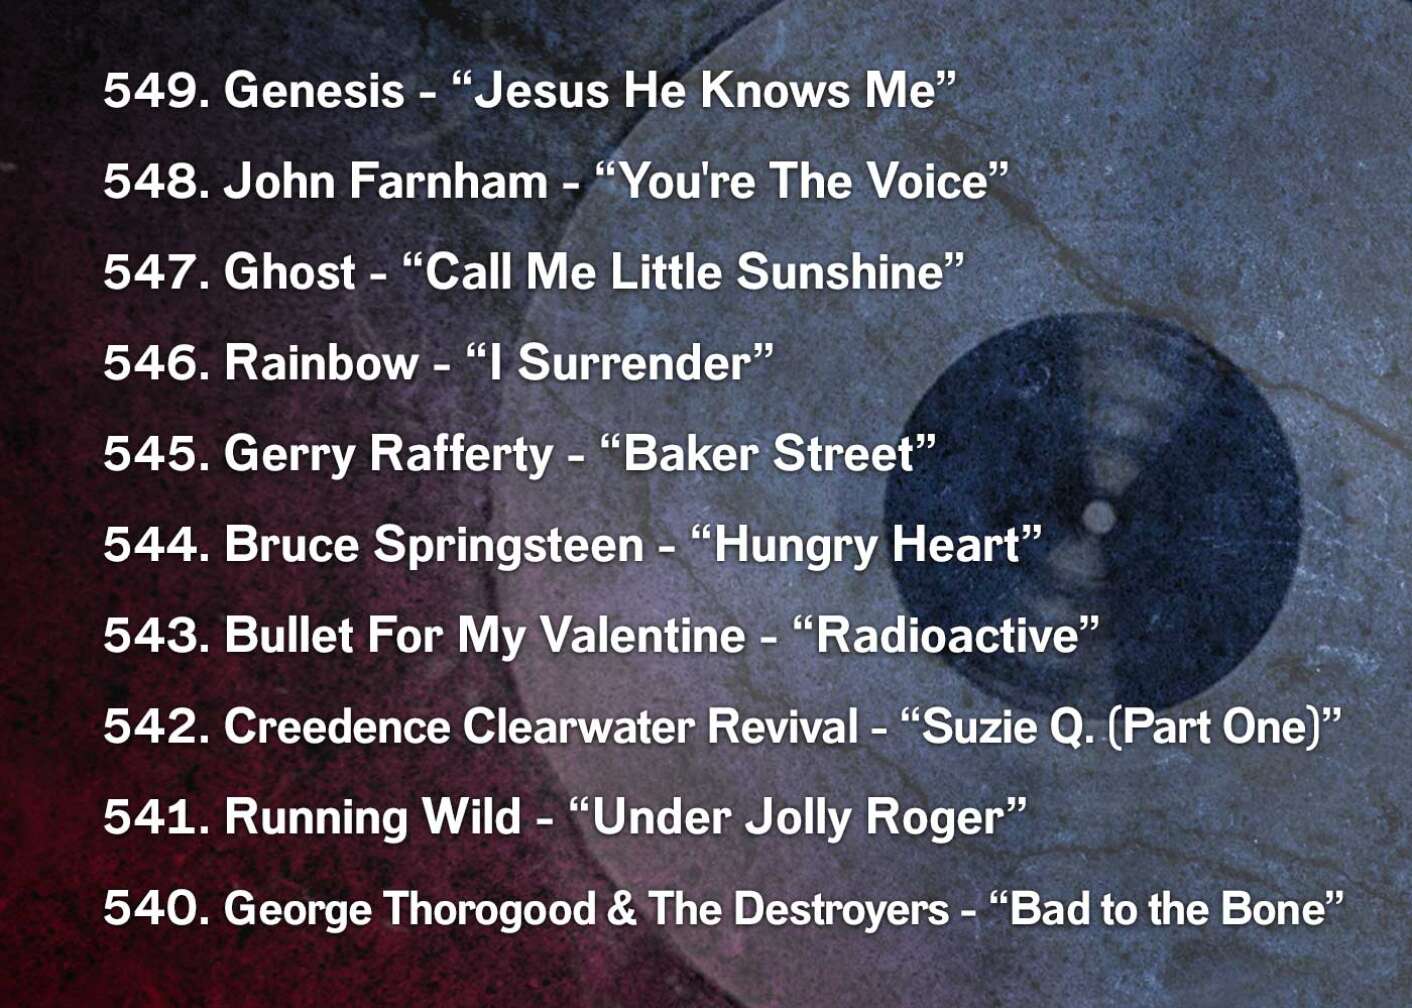 549. Genesis - “Jesus He Knows Me” 548. John Farnham - “You're The Voice” 547. Ghost - “Call Me Little Sunshine” 546. Rainbow - “I Surrender” 545. Gerry Rafferty - “Baker Street” 544. Bruce Springsteen - “Hungry Heart” 543. Bullet For My Valentine - “Radioactive” 542. Creedence Clearwater Revival - “Suzie Q. (Part One)” 541. Running Wild - “Under Jolly Roger” 540. George Thorogood & The Destroyers - “Bad to the Bone”